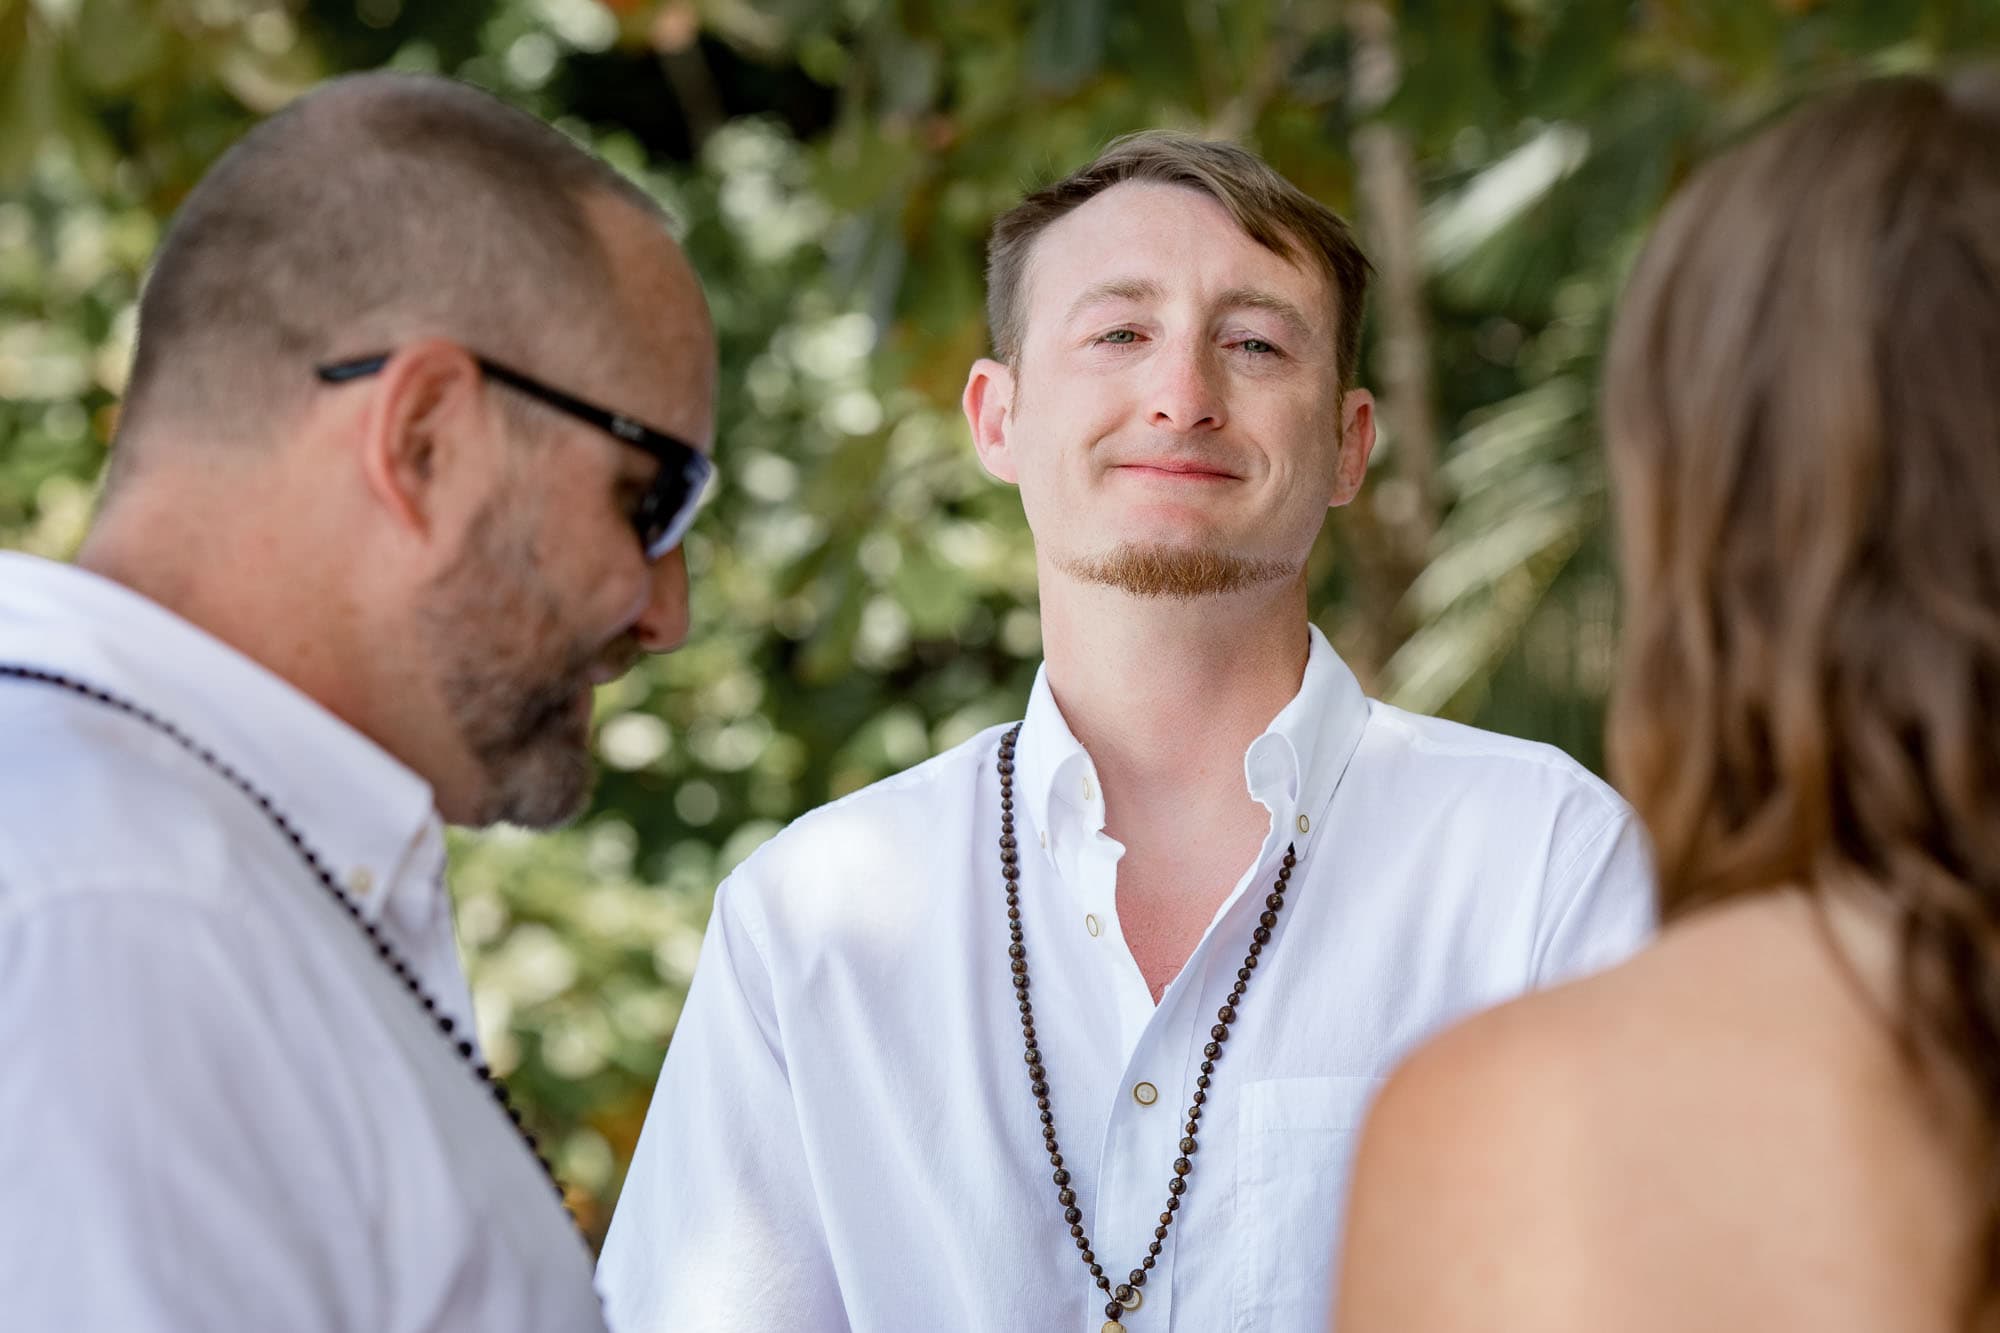 The groom tears up during the ceremony